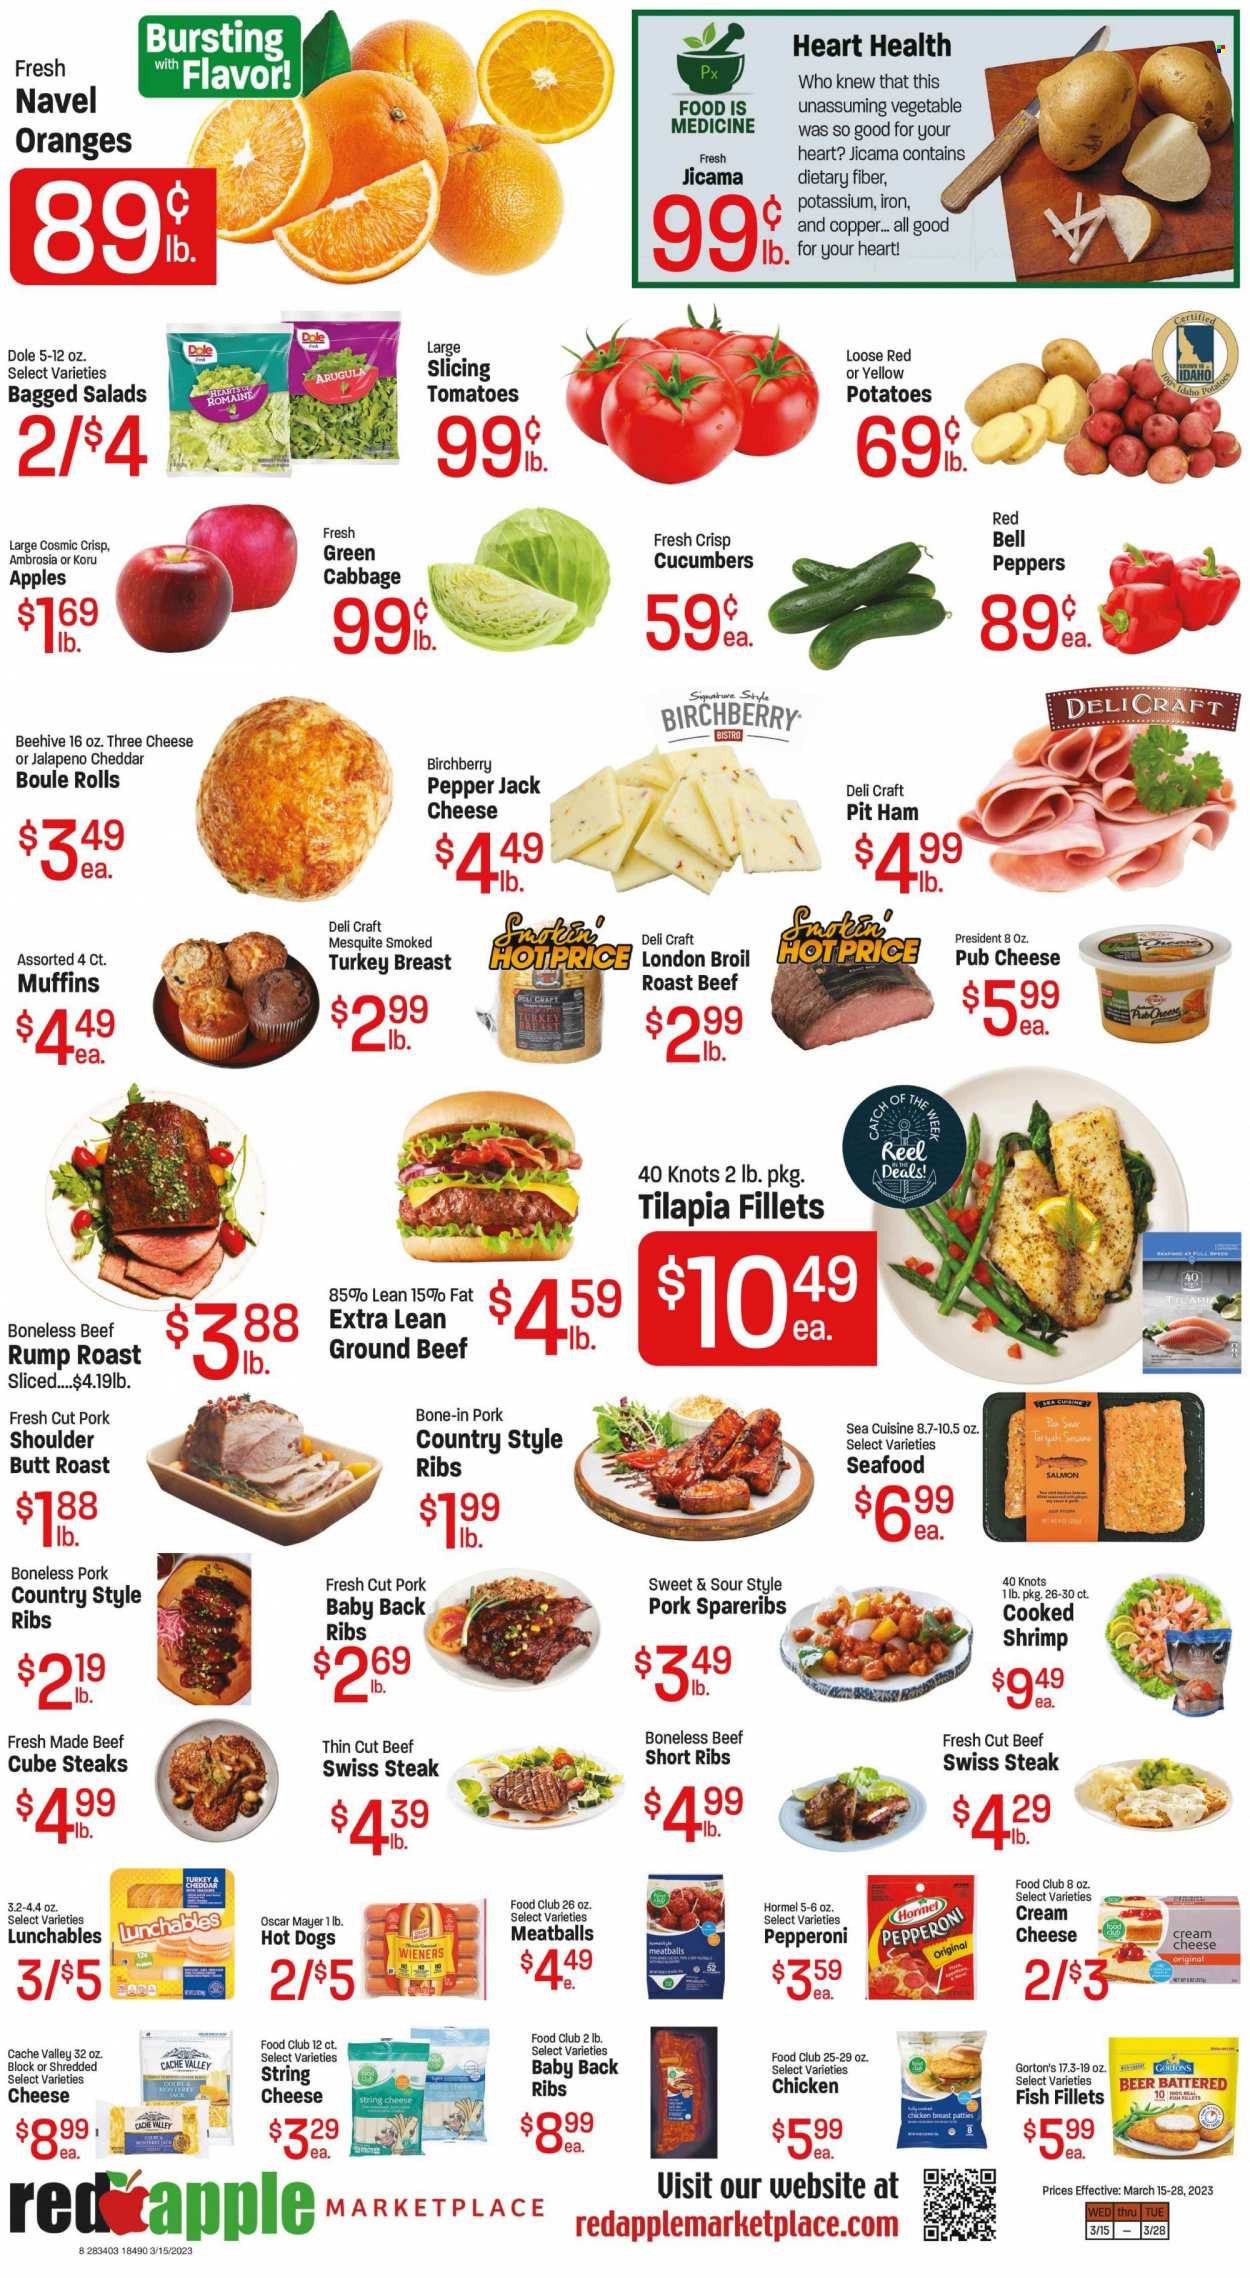 thumbnail - Red Apple Marketplace Flyer - 03/15/2023 - 03/28/2023 - Sales products - muffin, arugula, bell peppers, cabbage, cucumber, ginger, tomatoes, potatoes, Dole, peppers, apples, oranges, fish fillets, salmon, tilapia, seafood, fish, shrimps, Gorton's, hot dog, meatballs, Lunchables, Hormel, roast, boneless pit hams, ham, Oscar Mayer, pepperoni, Colby cheese, Monterey Jack cheese, string cheese, Pepper Jack cheese, pub cheese, Président, beer, chicken breasts, beef meat, beef ribs, ground beef, steak, roast beef, ribs, pork meat, pork ribs, pork shoulder, pork spare ribs, pork back ribs, country style ribs, jicama, navel oranges. Page 8.